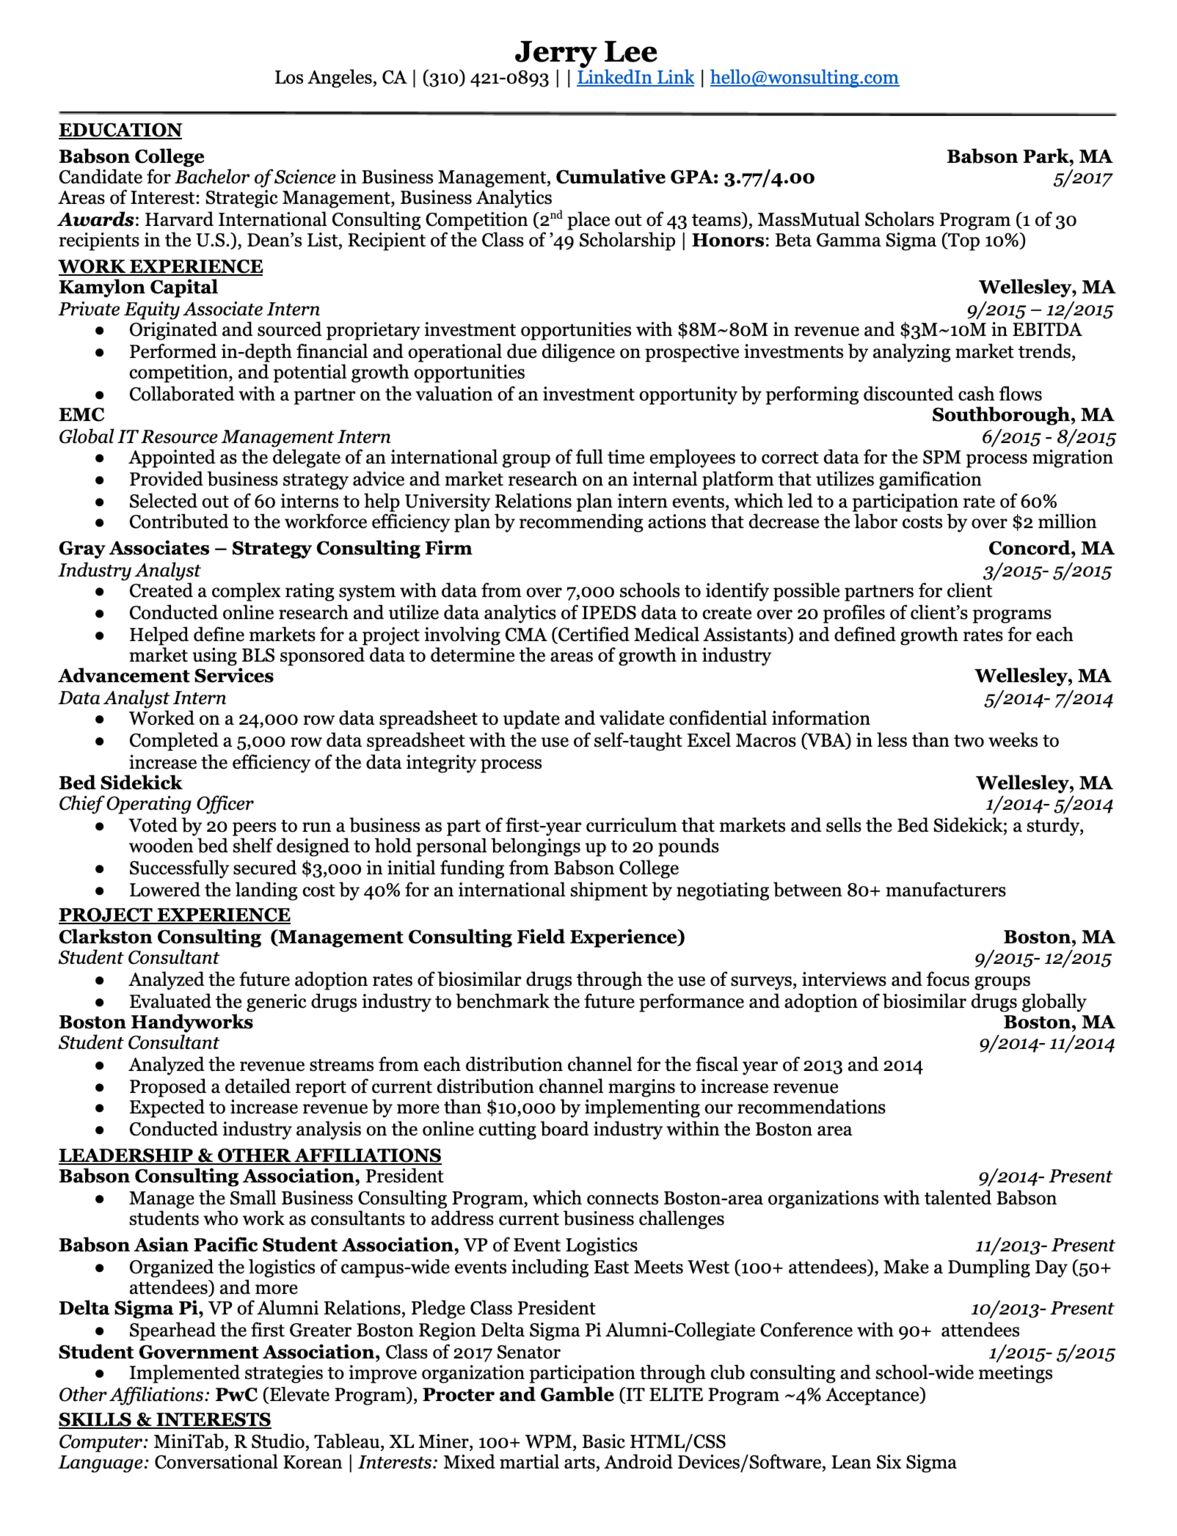 Resume Template Wonsulting